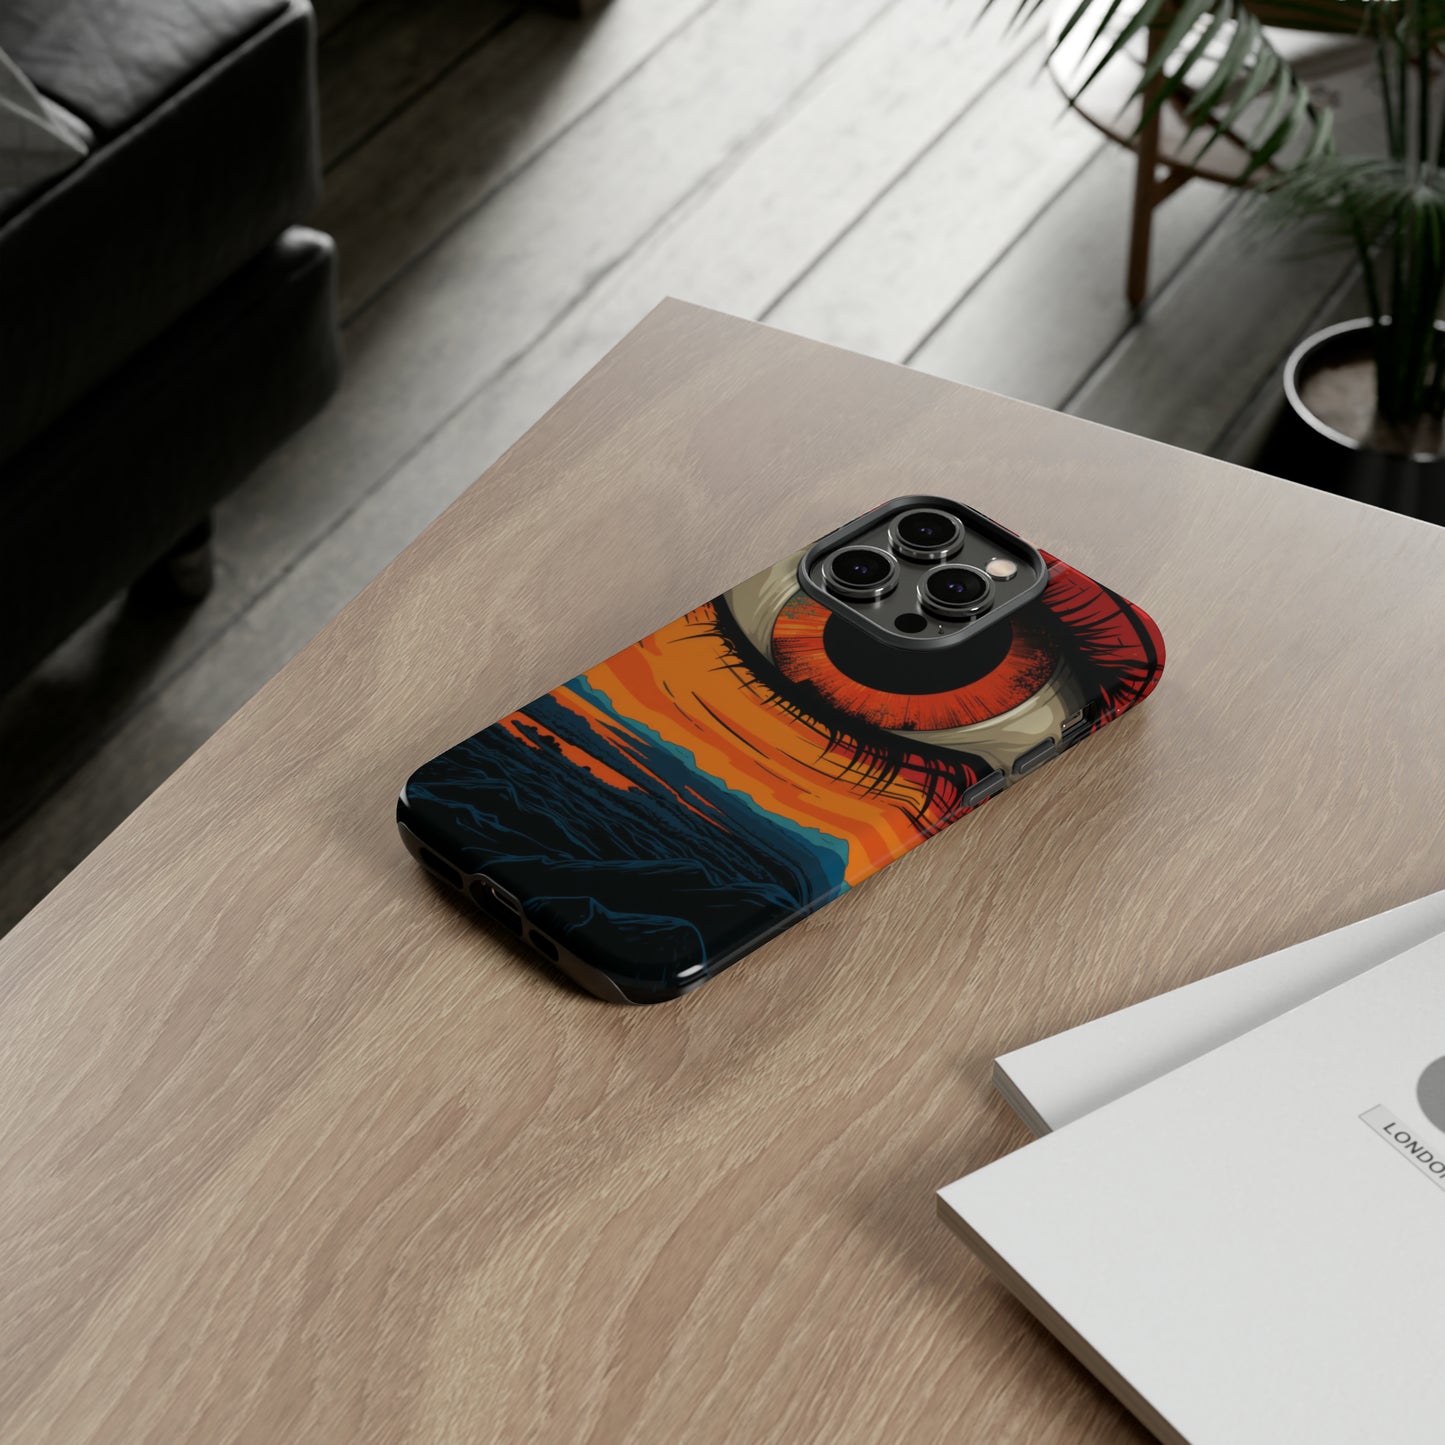 Sunset's Gaze: Burning Vision within an Eye Phone Case for iPhone, Samsung, Pixel